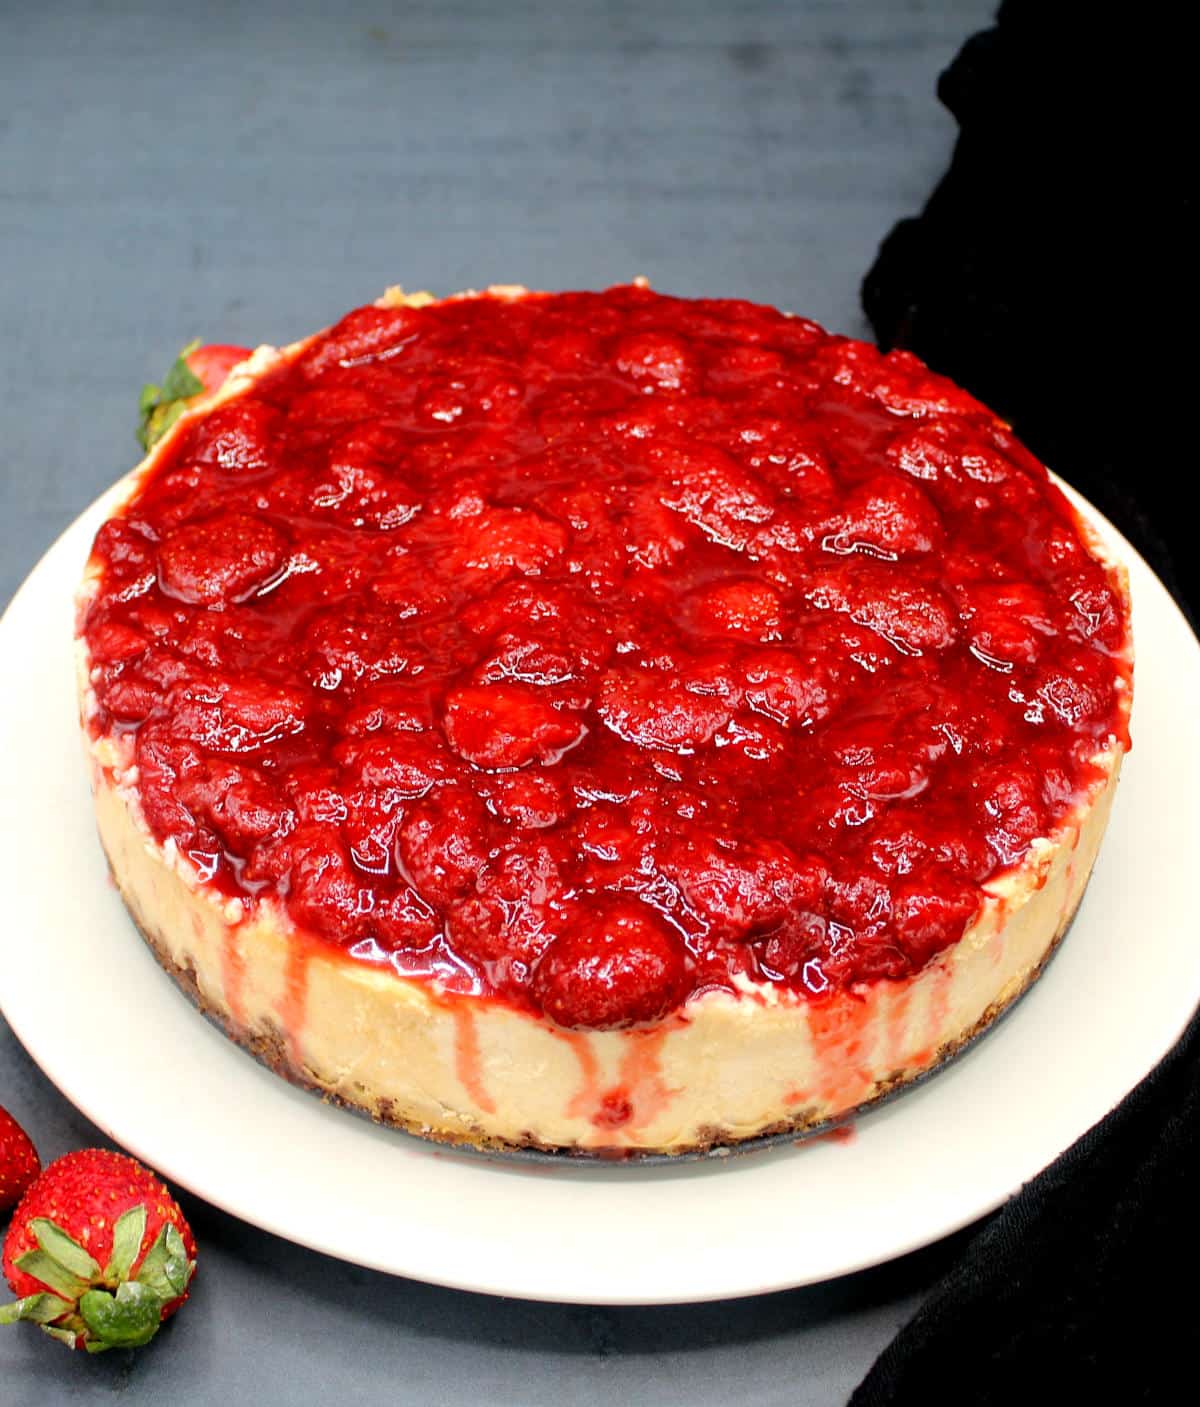 Front shot of a vegan low carb keto cheesecake with strawberry topping.